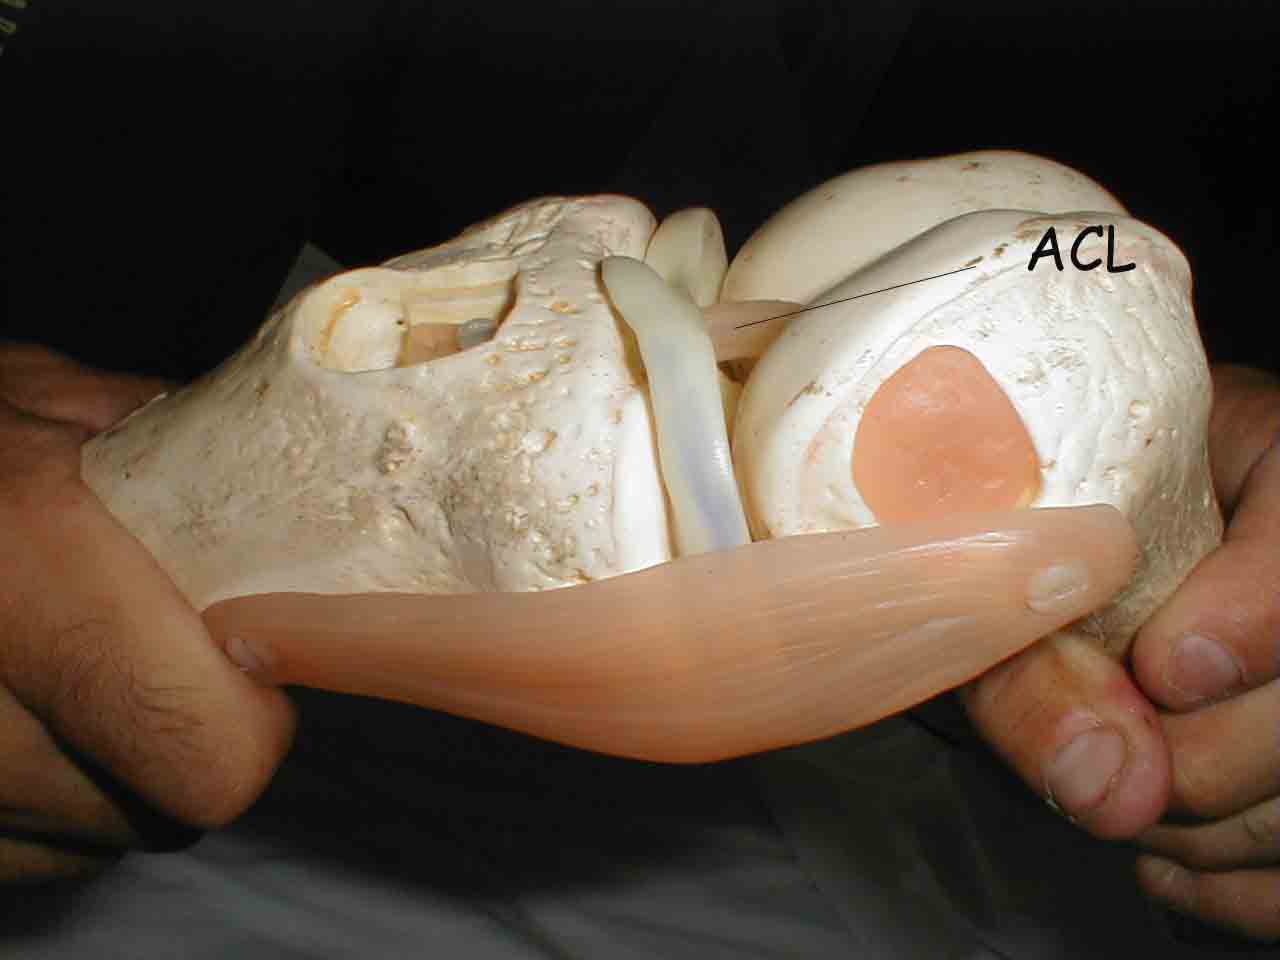 Stressing the ACL Model